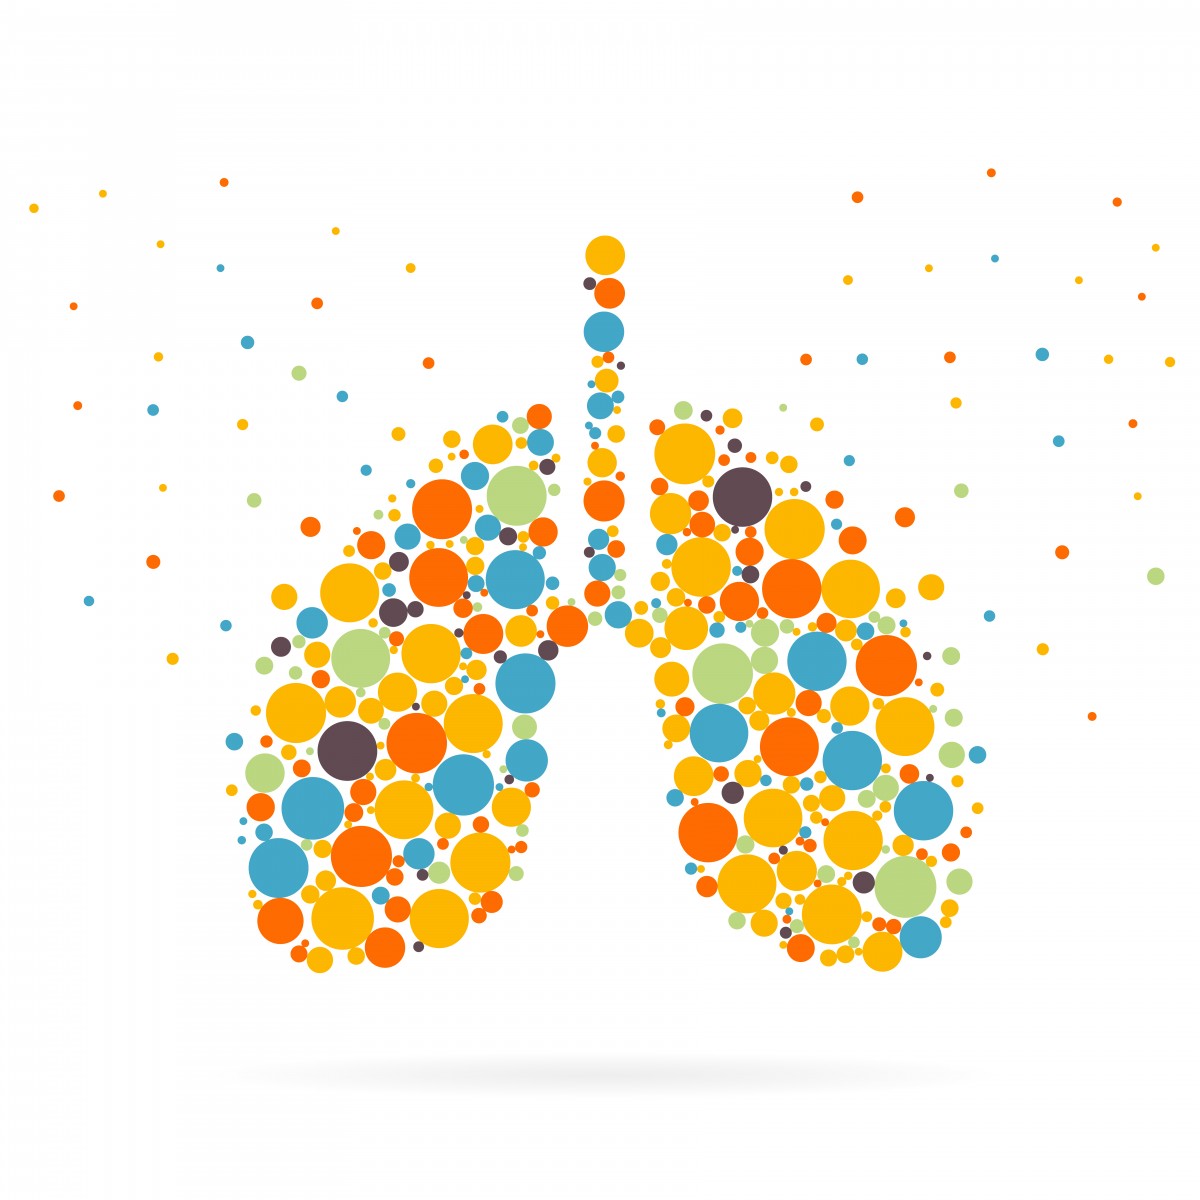 Exacerbations in Non-cystic Fibrosis Bronchiectasis Explored in Observational Cohort Study